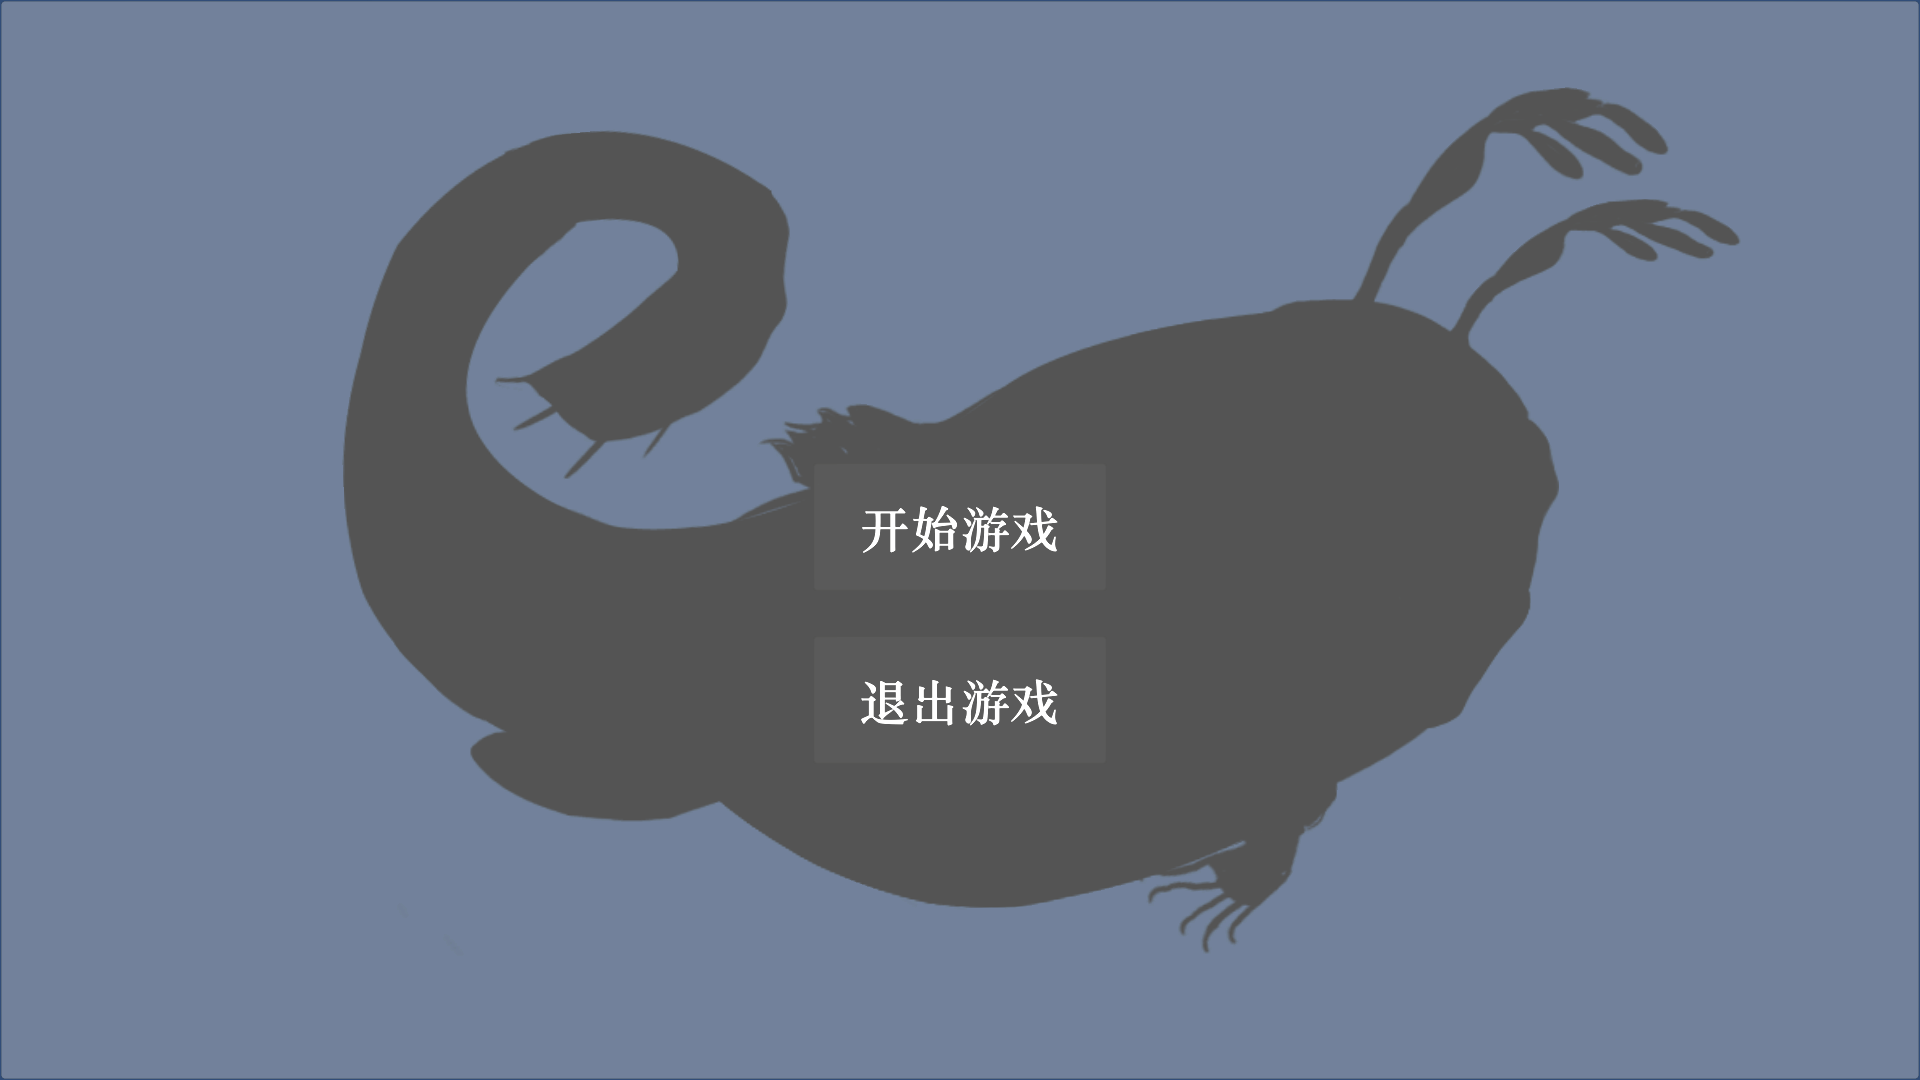 Banner of 呼喚 